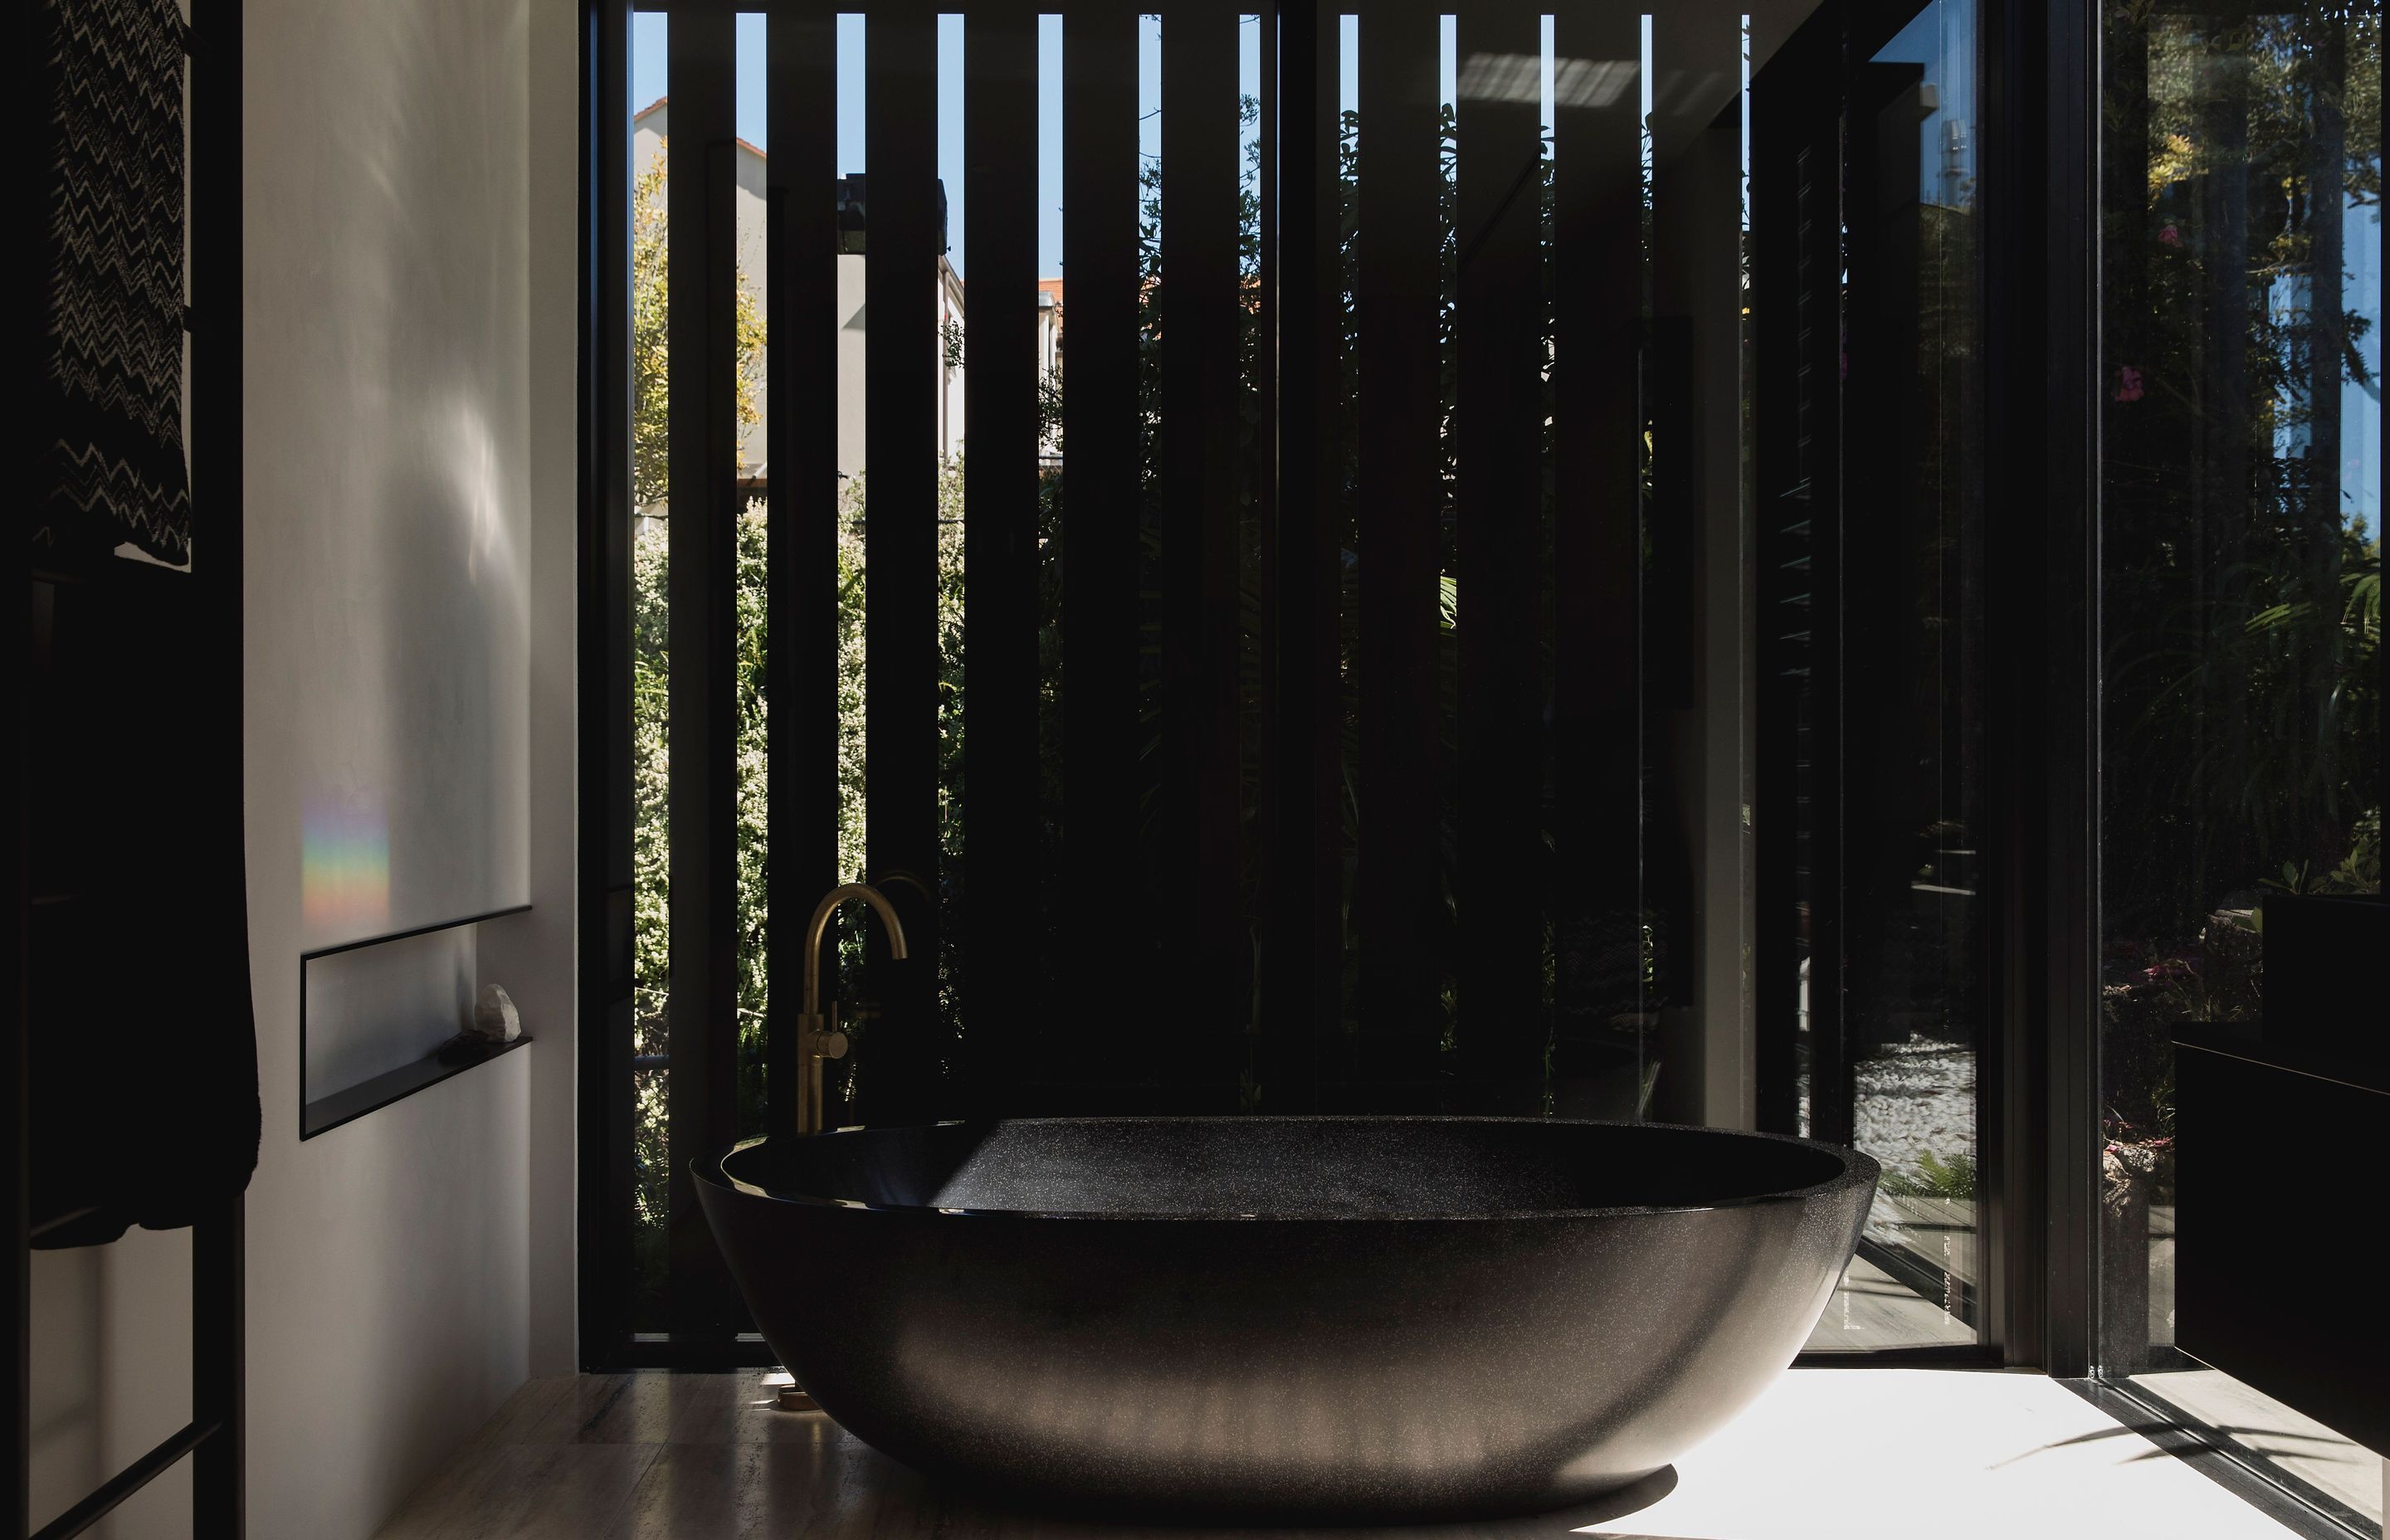 The architects really love designing bathrooms that are really intenses spaces, including this en suite bathroom with curvaceous freestanding black bath.